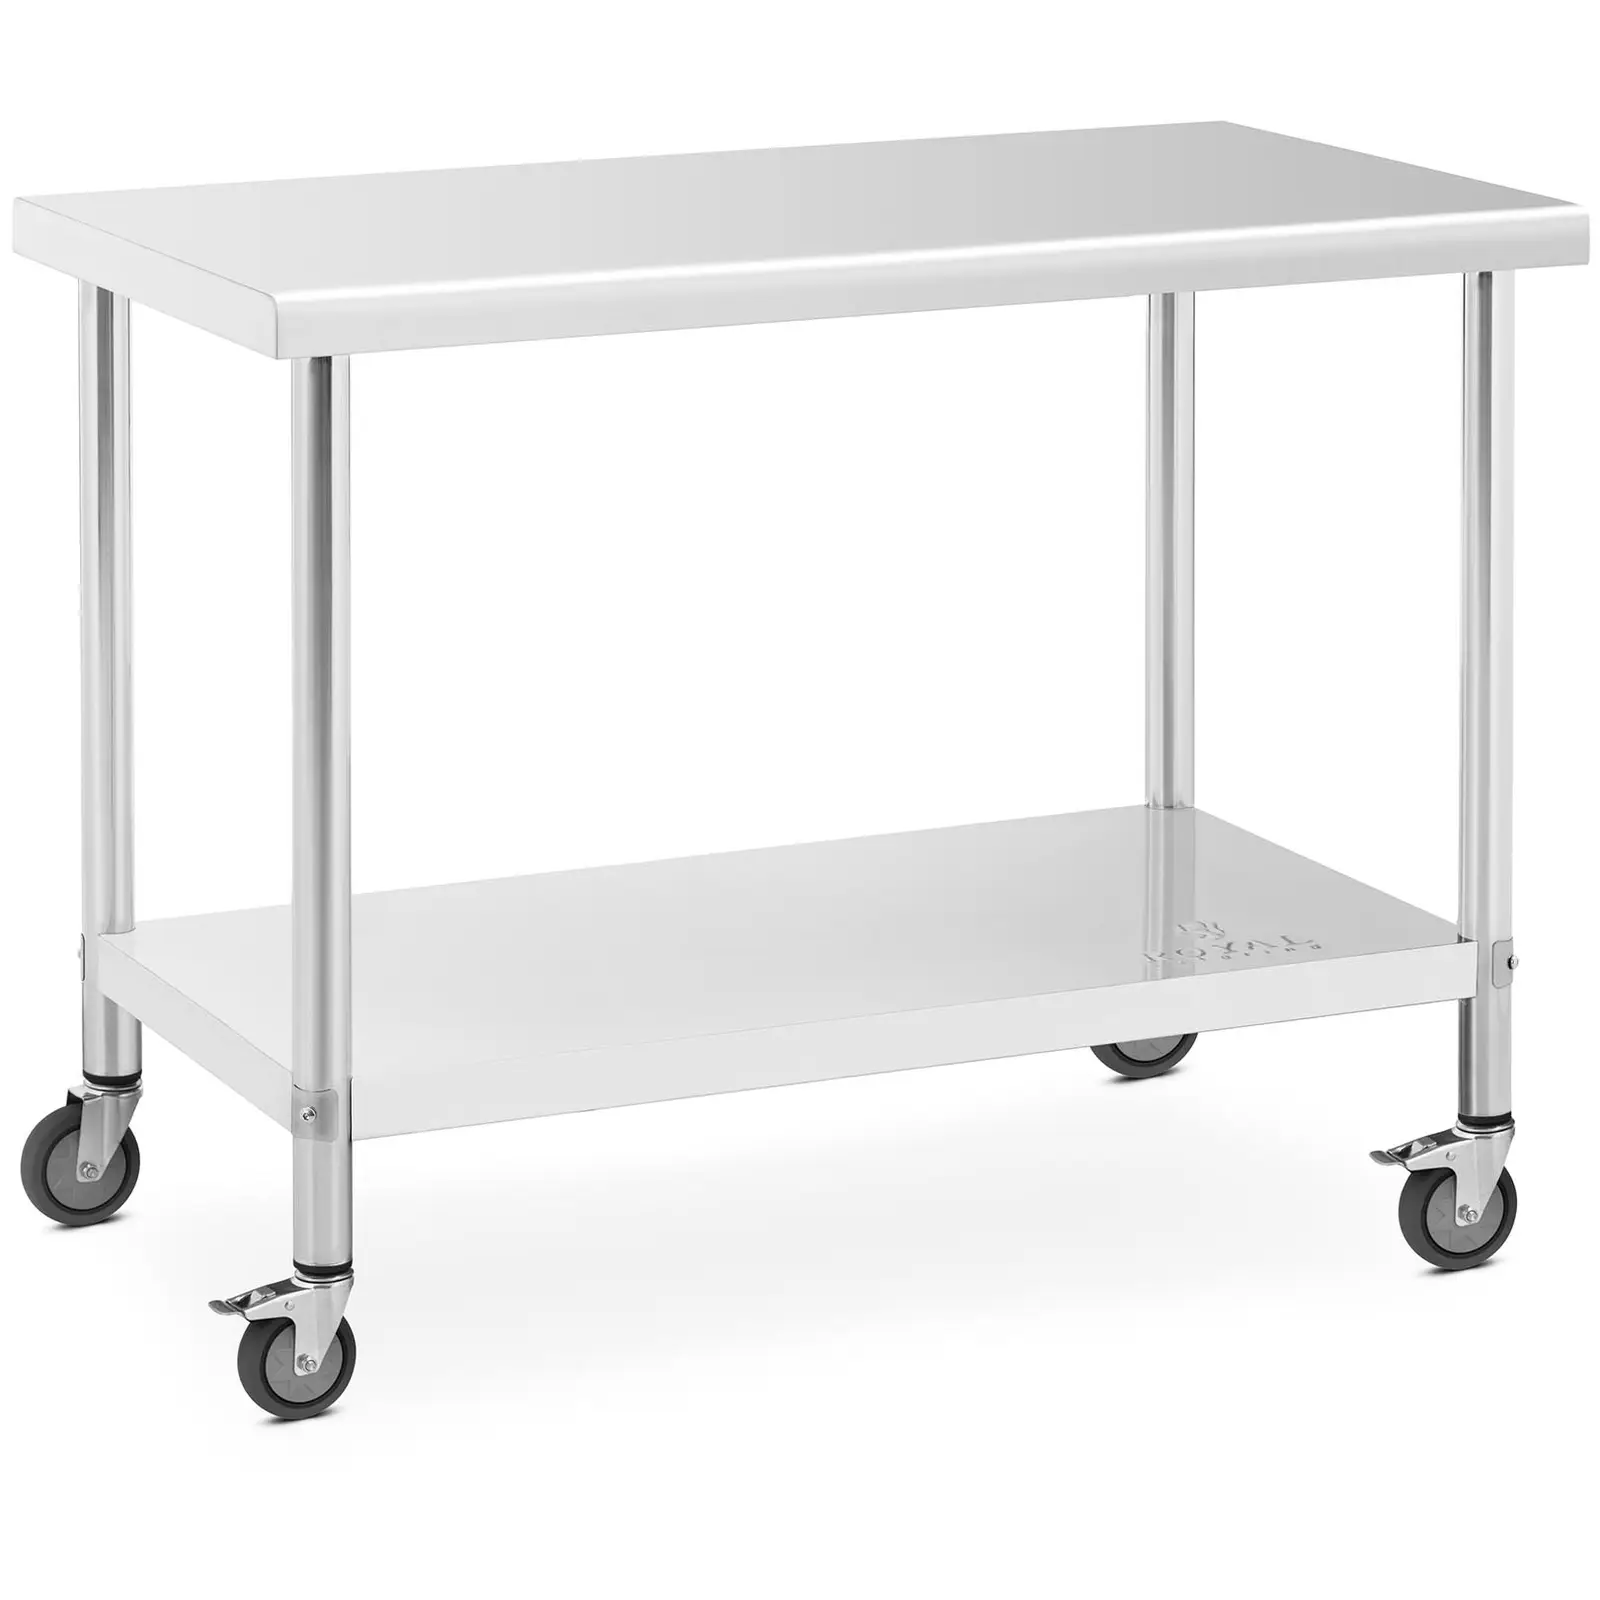 Wheeled work bench - 60 x 120 cm - 158 kg load capacity - Royal Catering